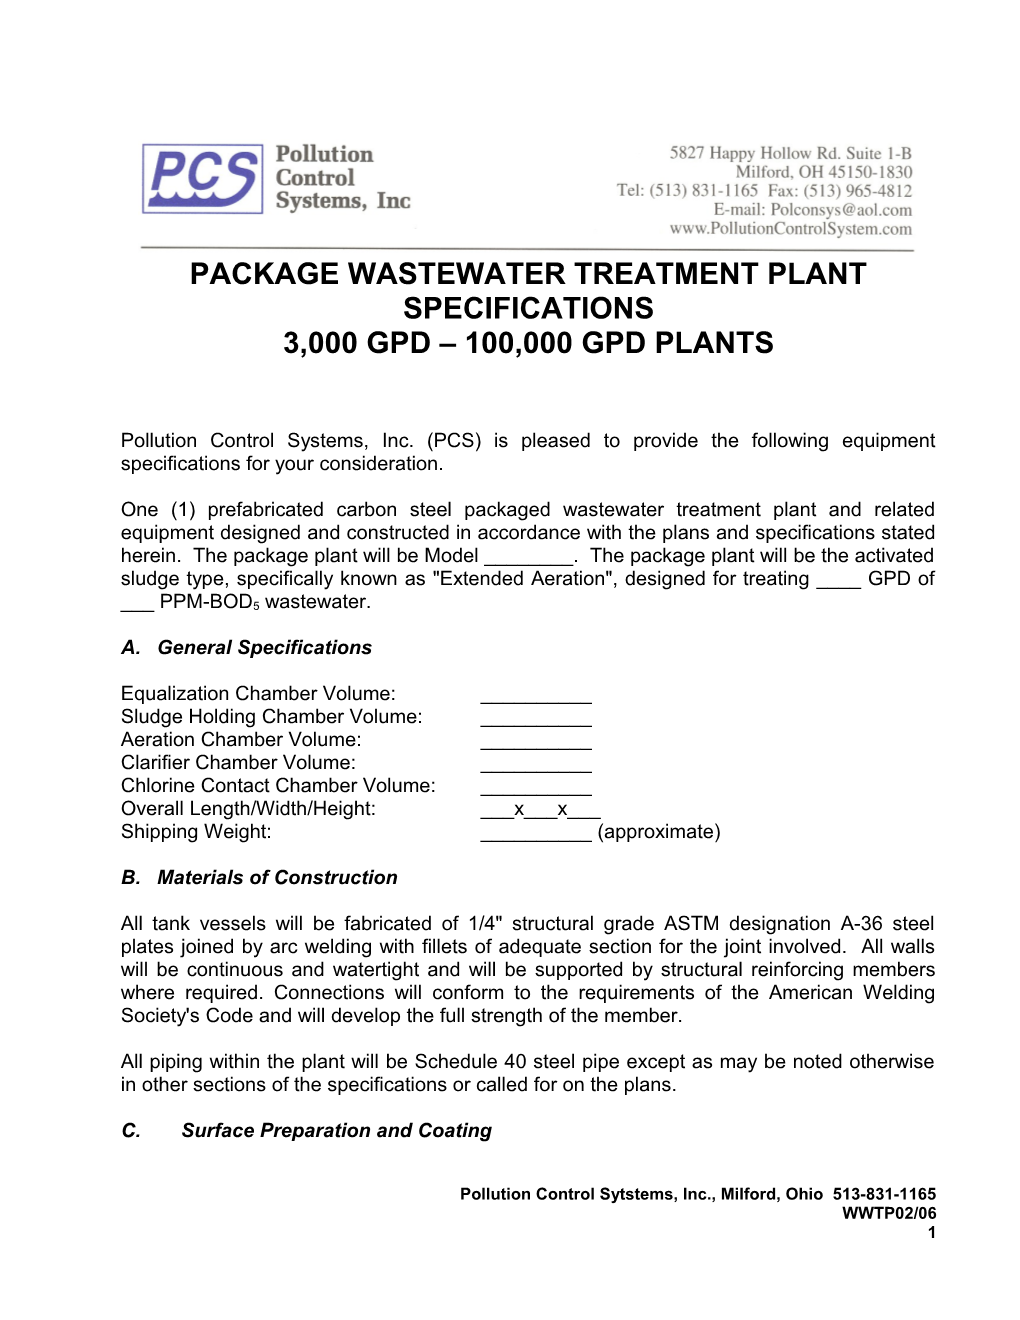 Package Wastewater Treatment Plant Specifications